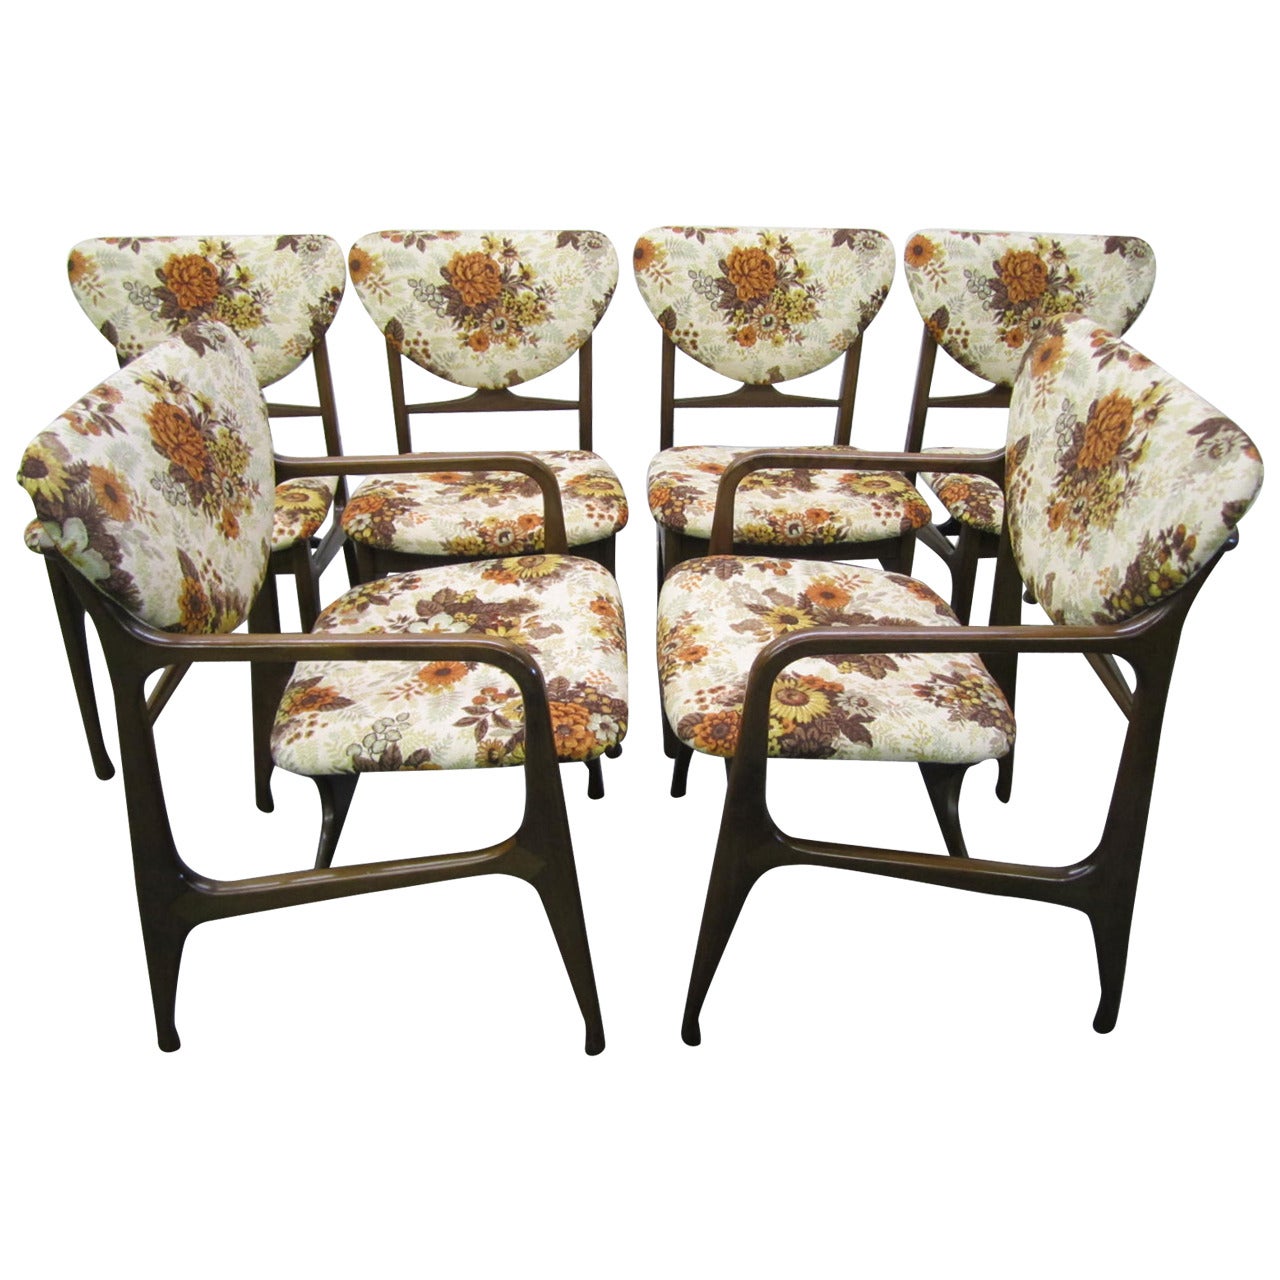 Excellent Set of Six Dining Chairs, Mid-Century Modern